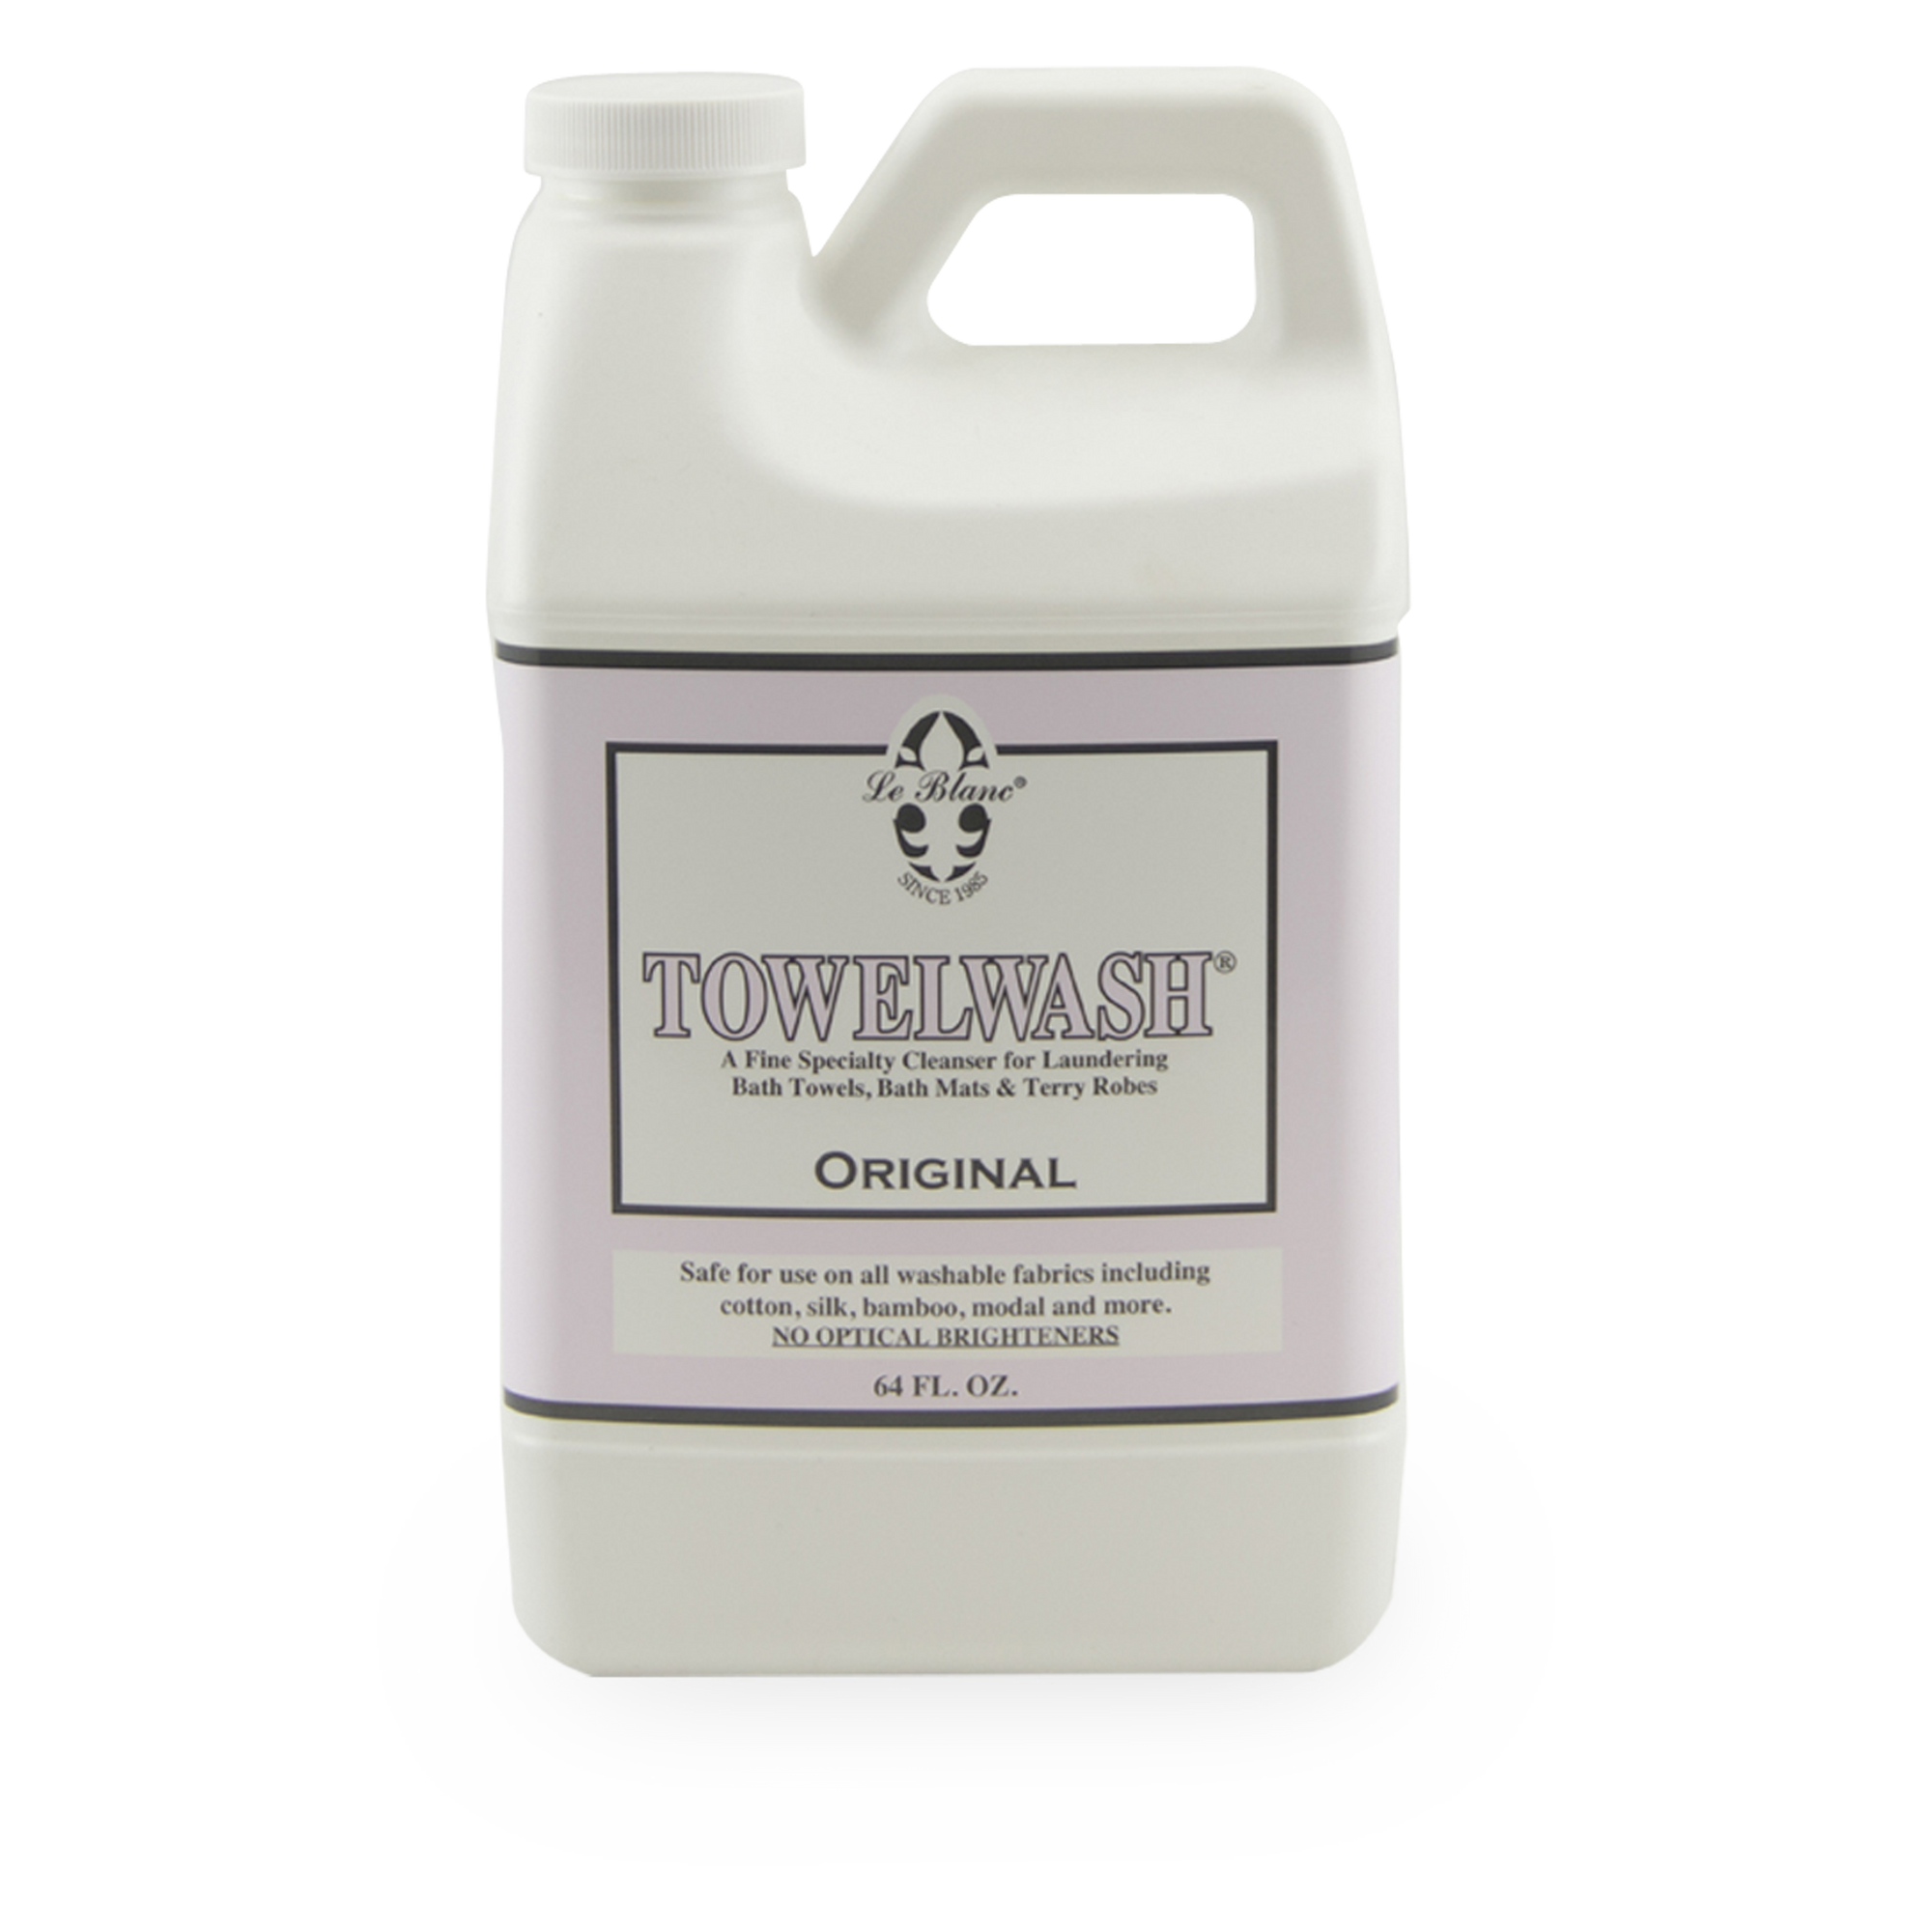 Original towel wash is safe for use on all washable fabrics including cotton, silk, bamboo, modal, and more.